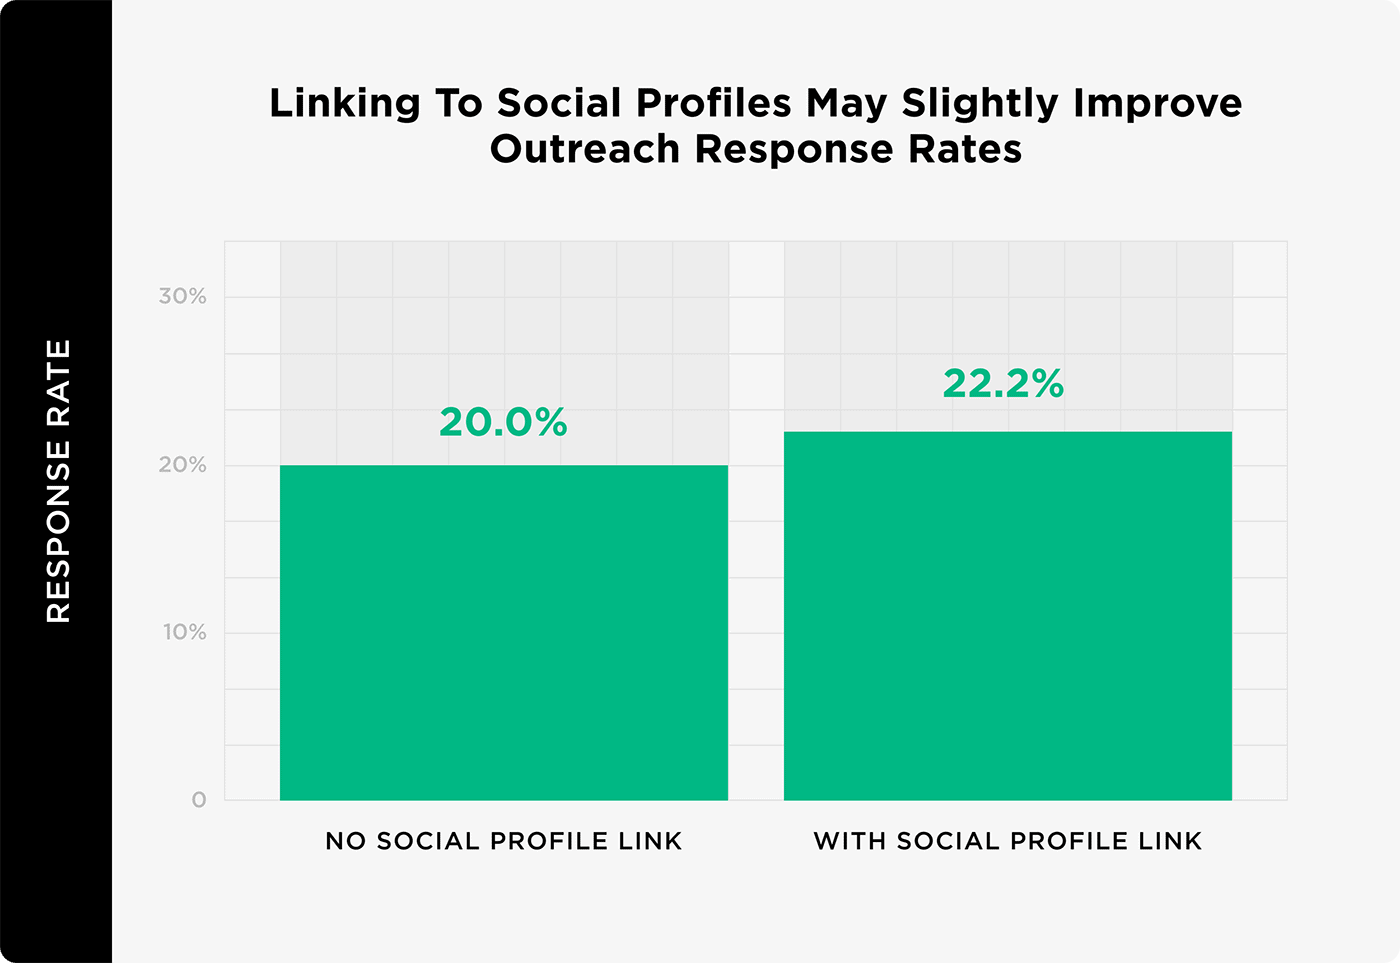 Linking to social profiles may slightly improve outreach response rates